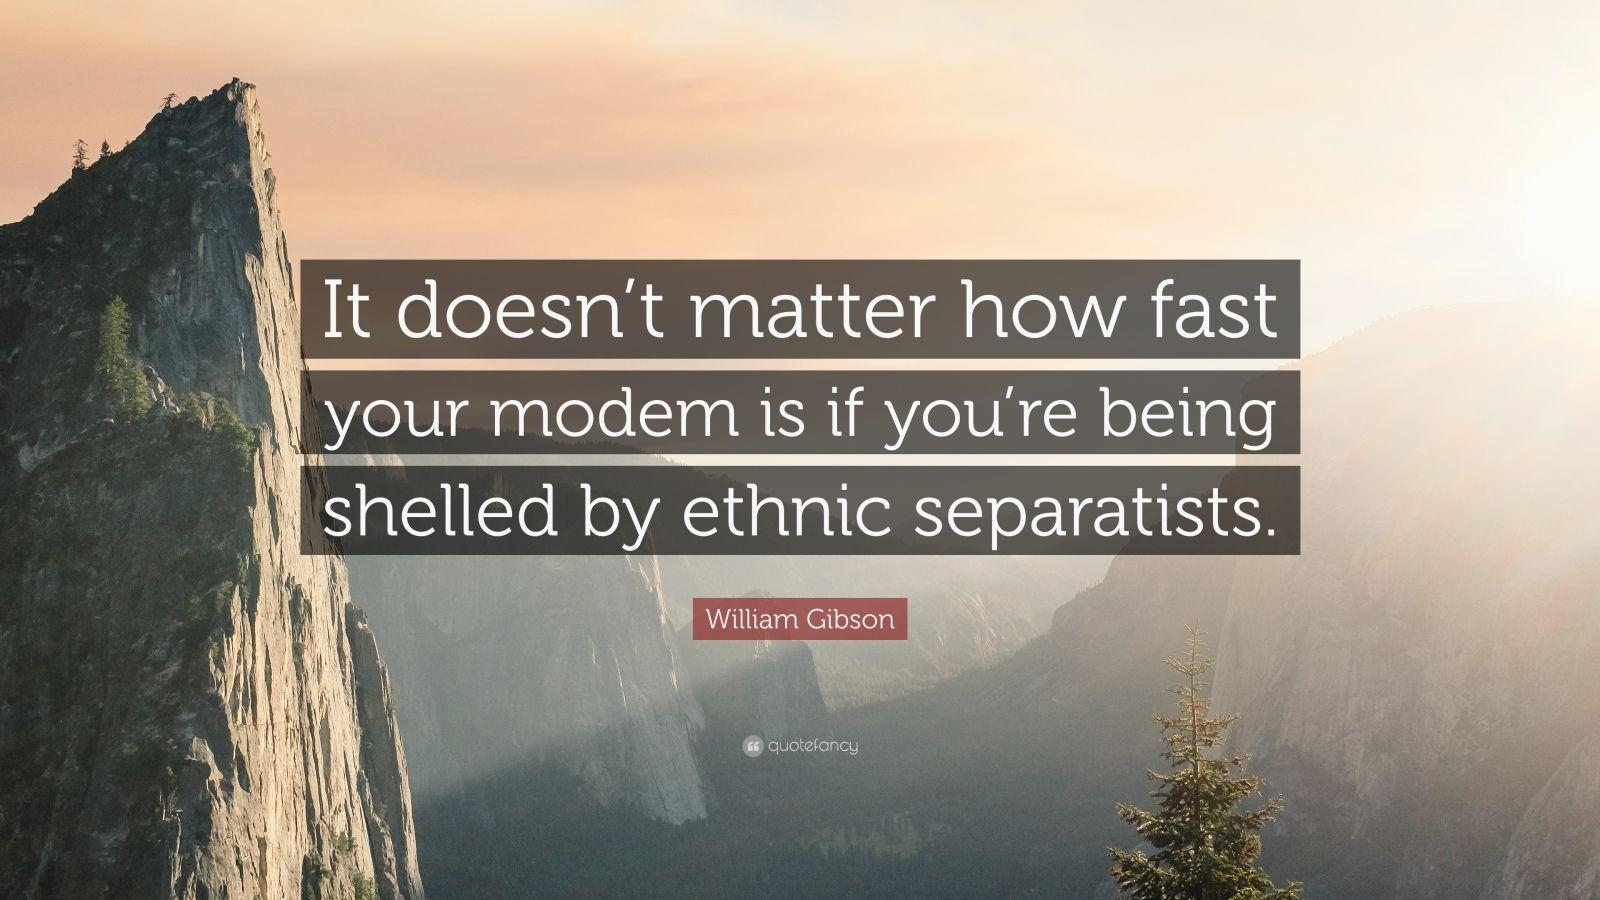 William Gibson Quote: “It doesn't matter how fast your modem